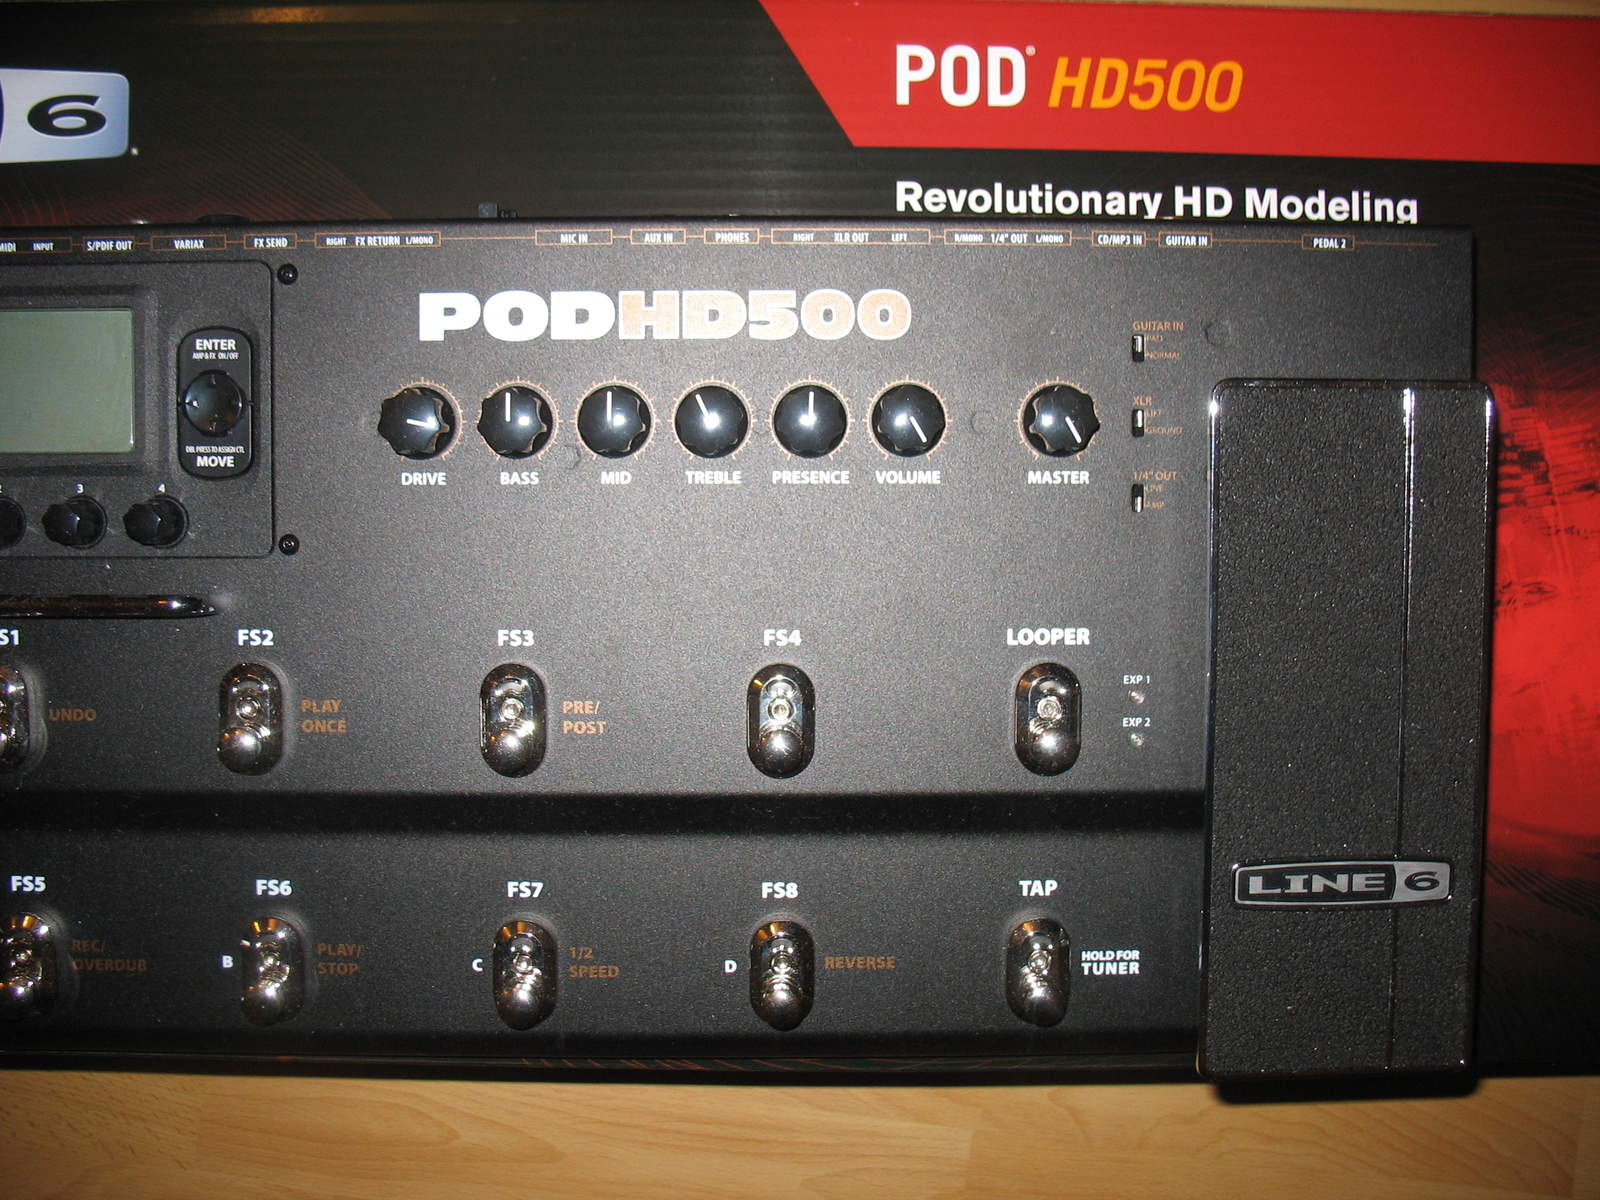 line 6 hd500 patches